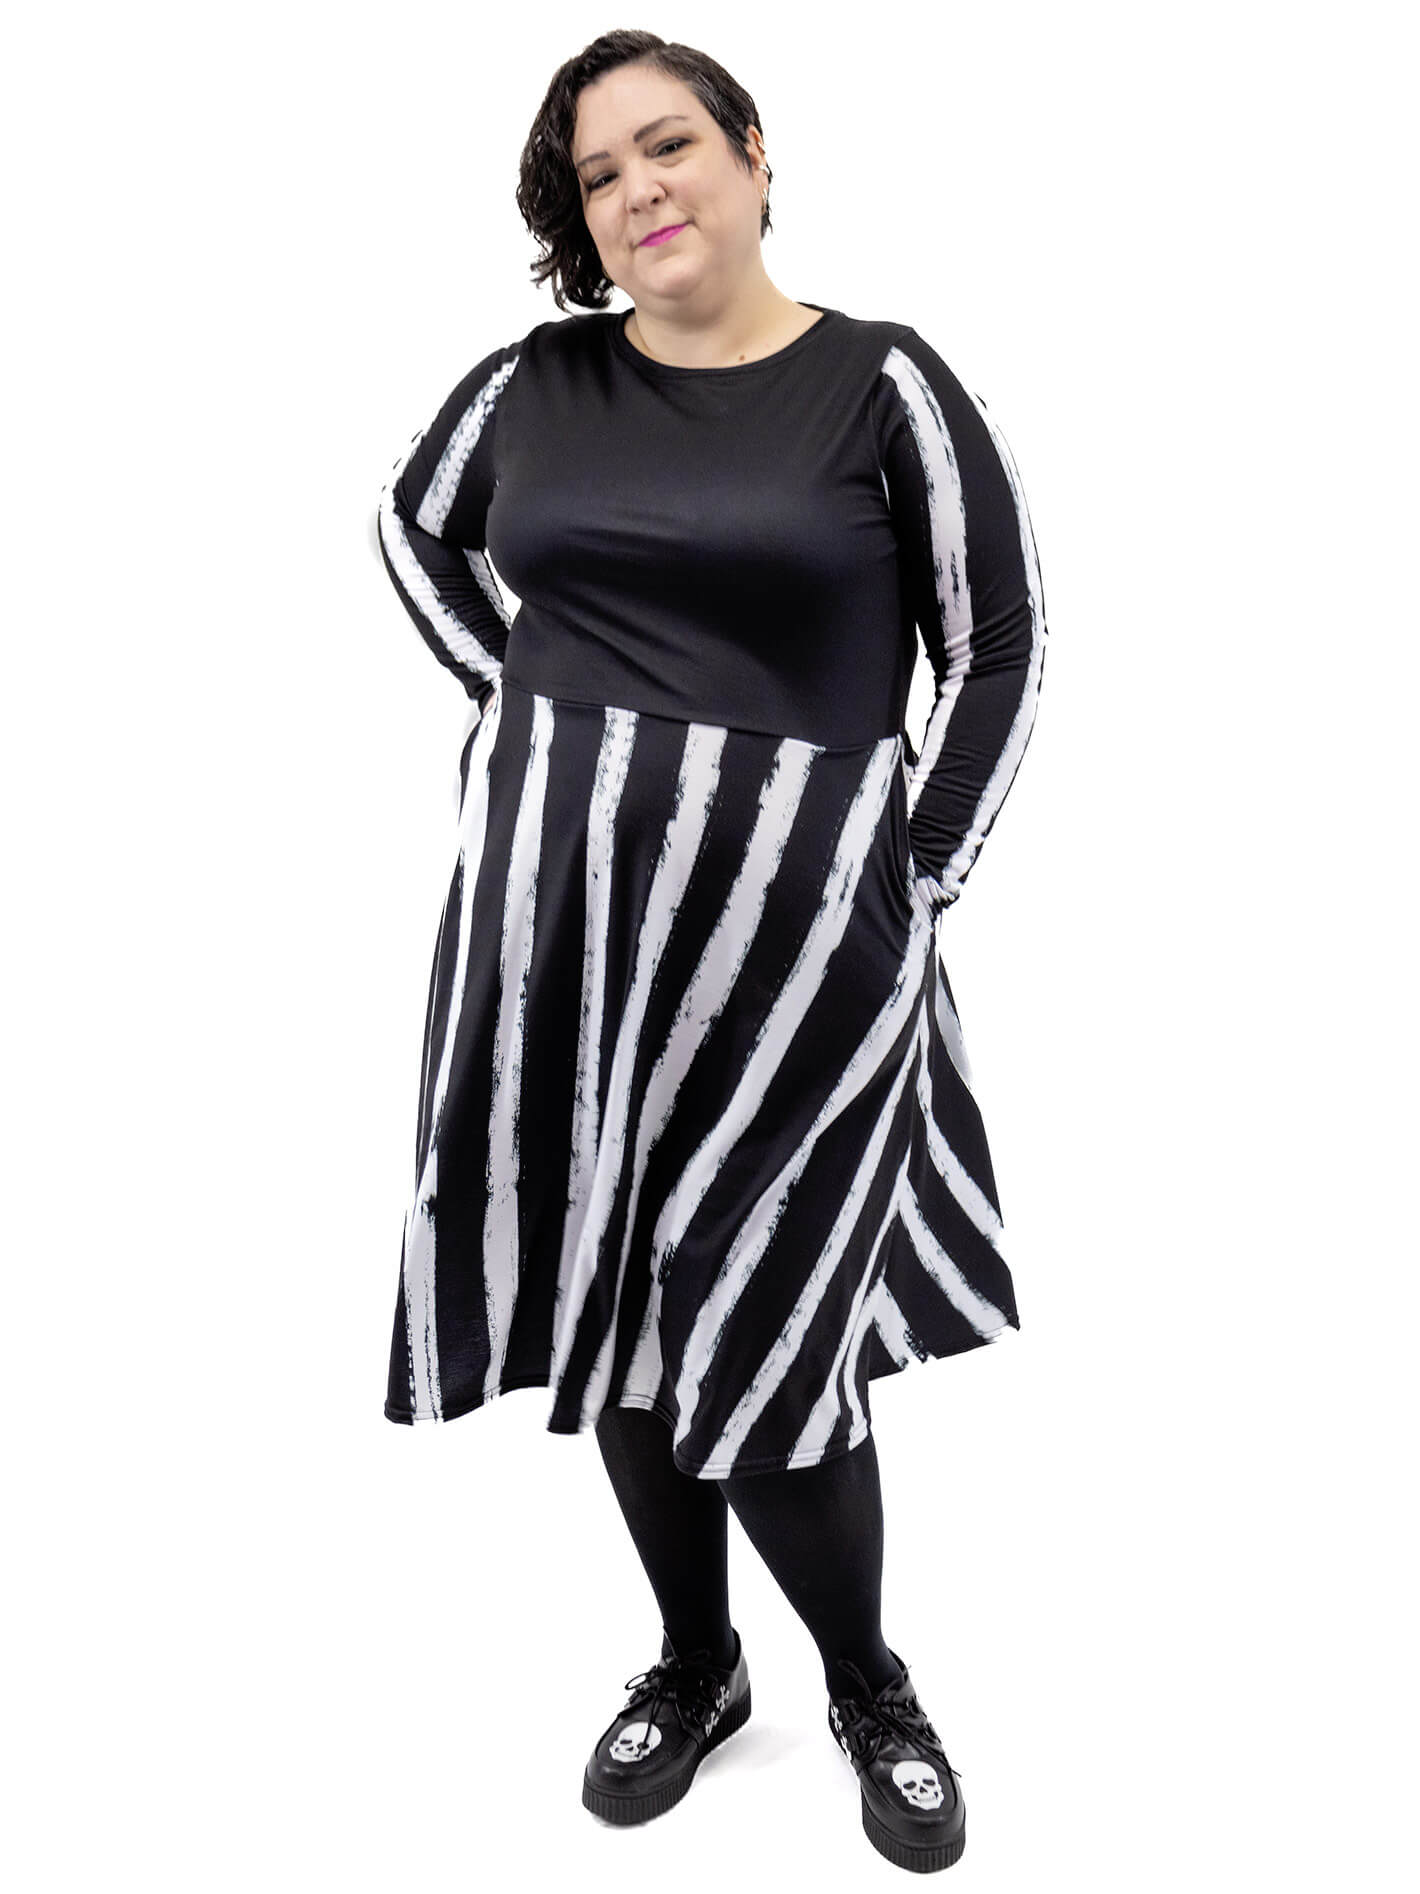 Plus size gothic black and white striped dress.